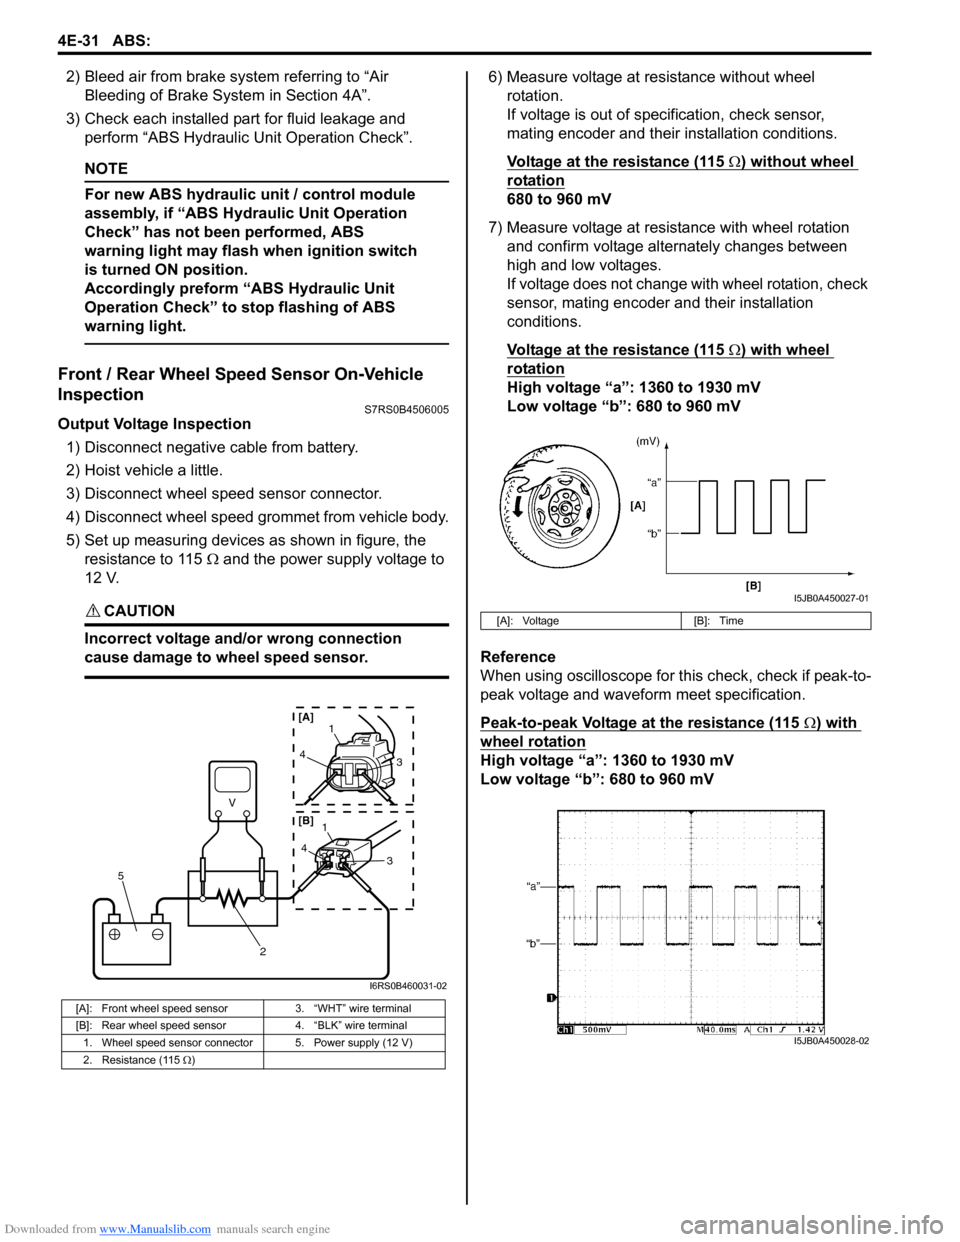 SUZUKI SWIFT 2007 2.G Service Workshop Manual Downloaded from www.Manualslib.com manuals search engine 4E-31 ABS: 
2) Bleed air from brake system referring to “Air Bleeding of Brake System in Section 4A”.
3) Check each installed part for flui